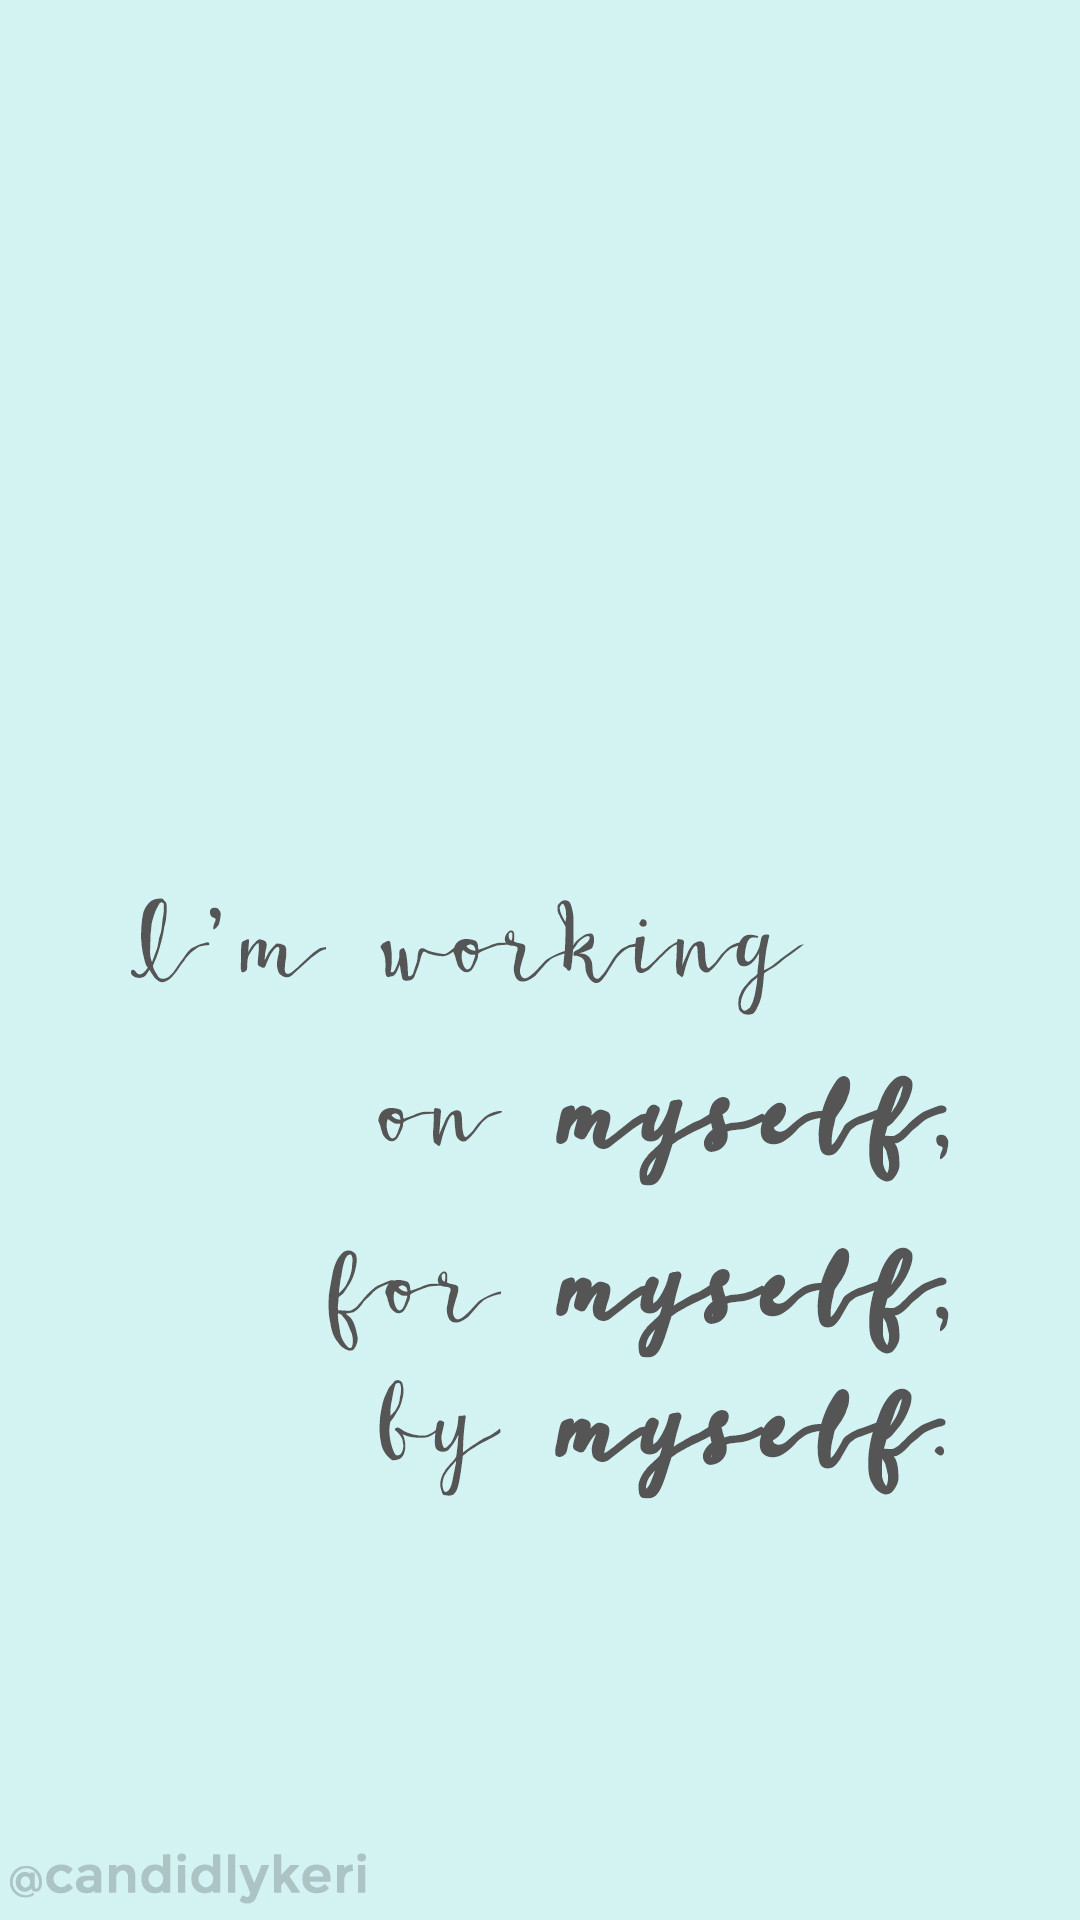 1080x1920 "Im working on myself, by myself, for myself" motivation inspirational quote  wallpaper